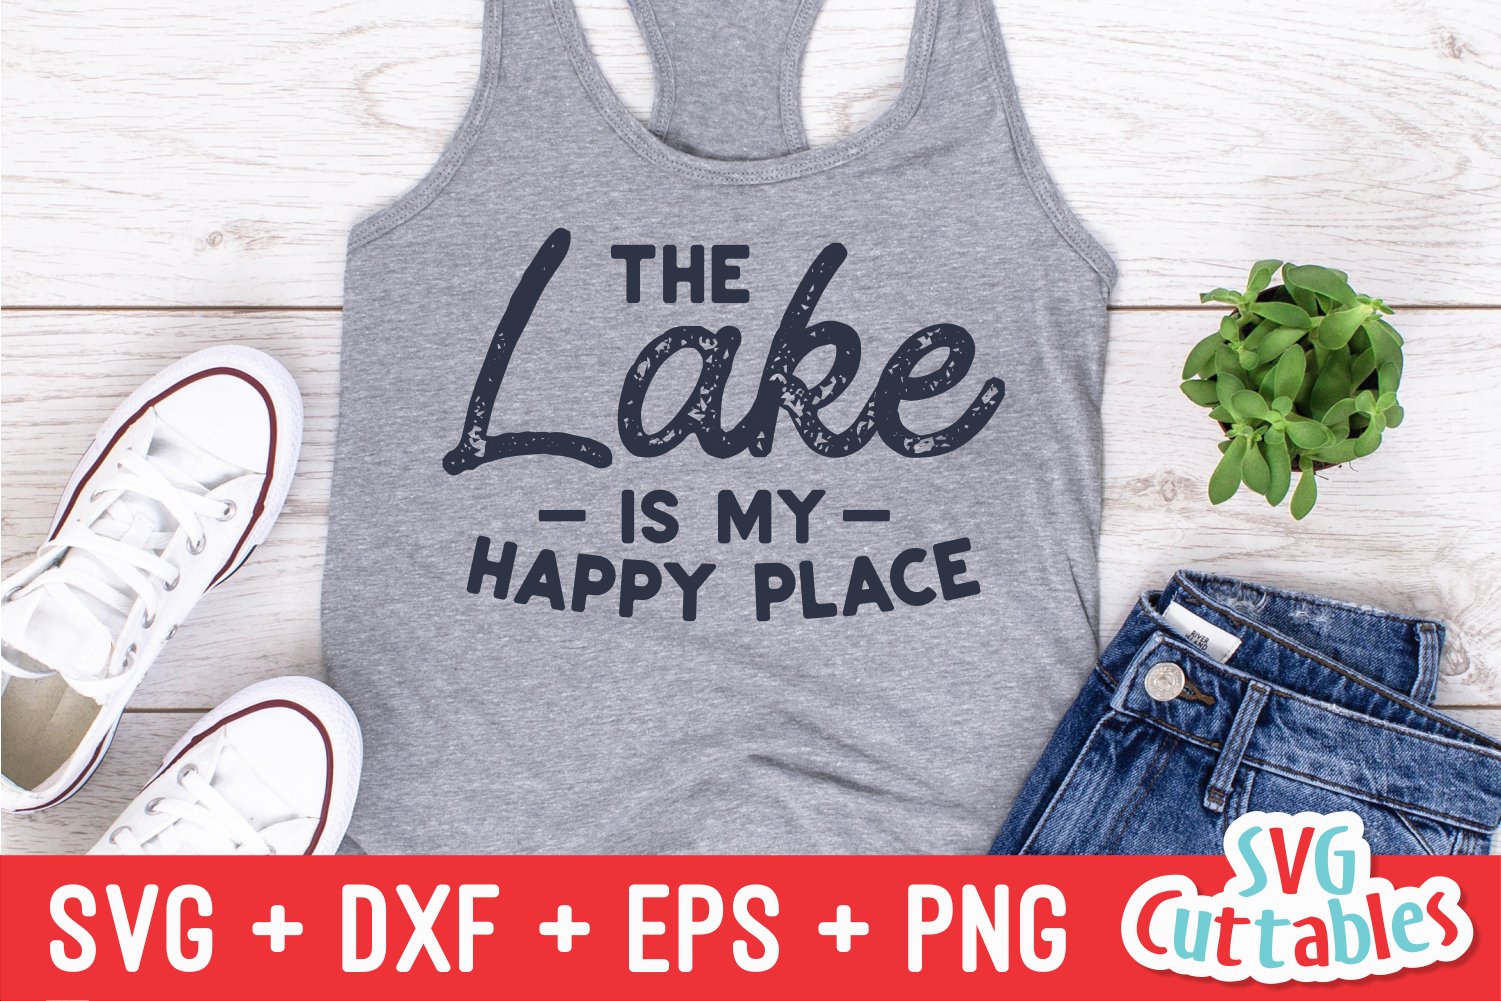 Perfect design for real lake lovers.